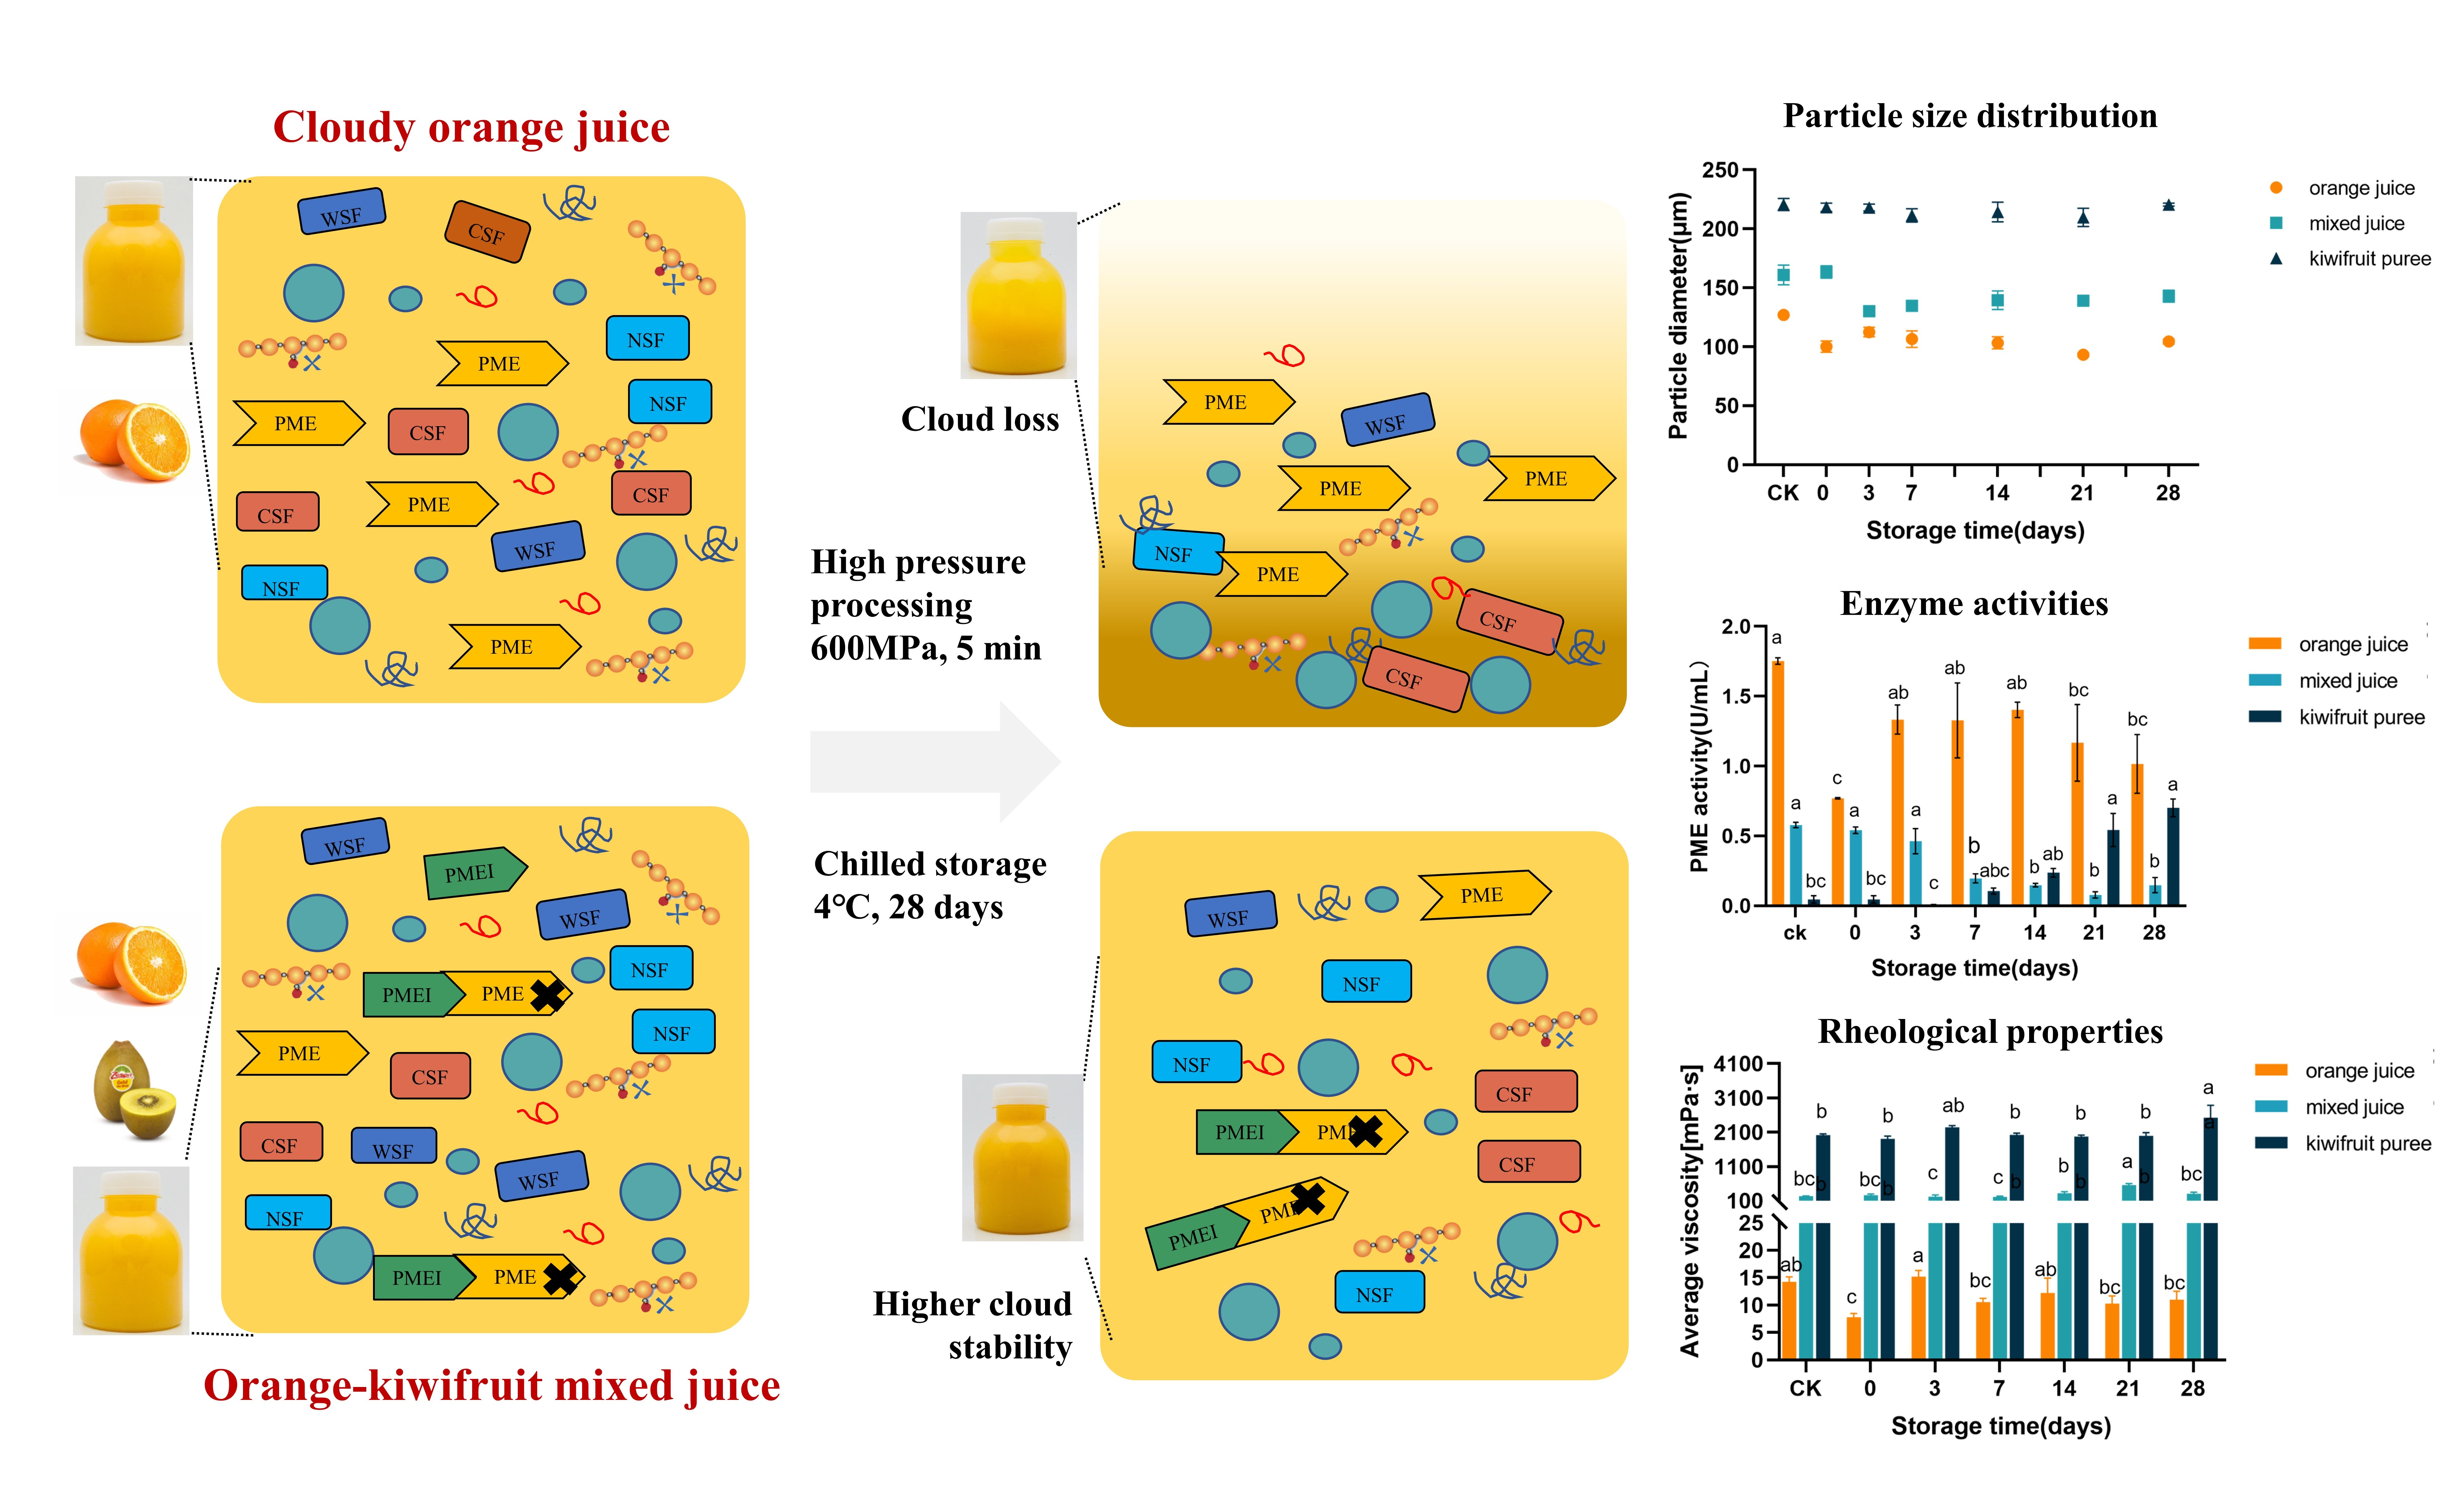 Changes in the Soluble and Insoluble Compounds of Shelf-Stable Orange Juice  in Relation to Non-Enzymatic Browning during Storage